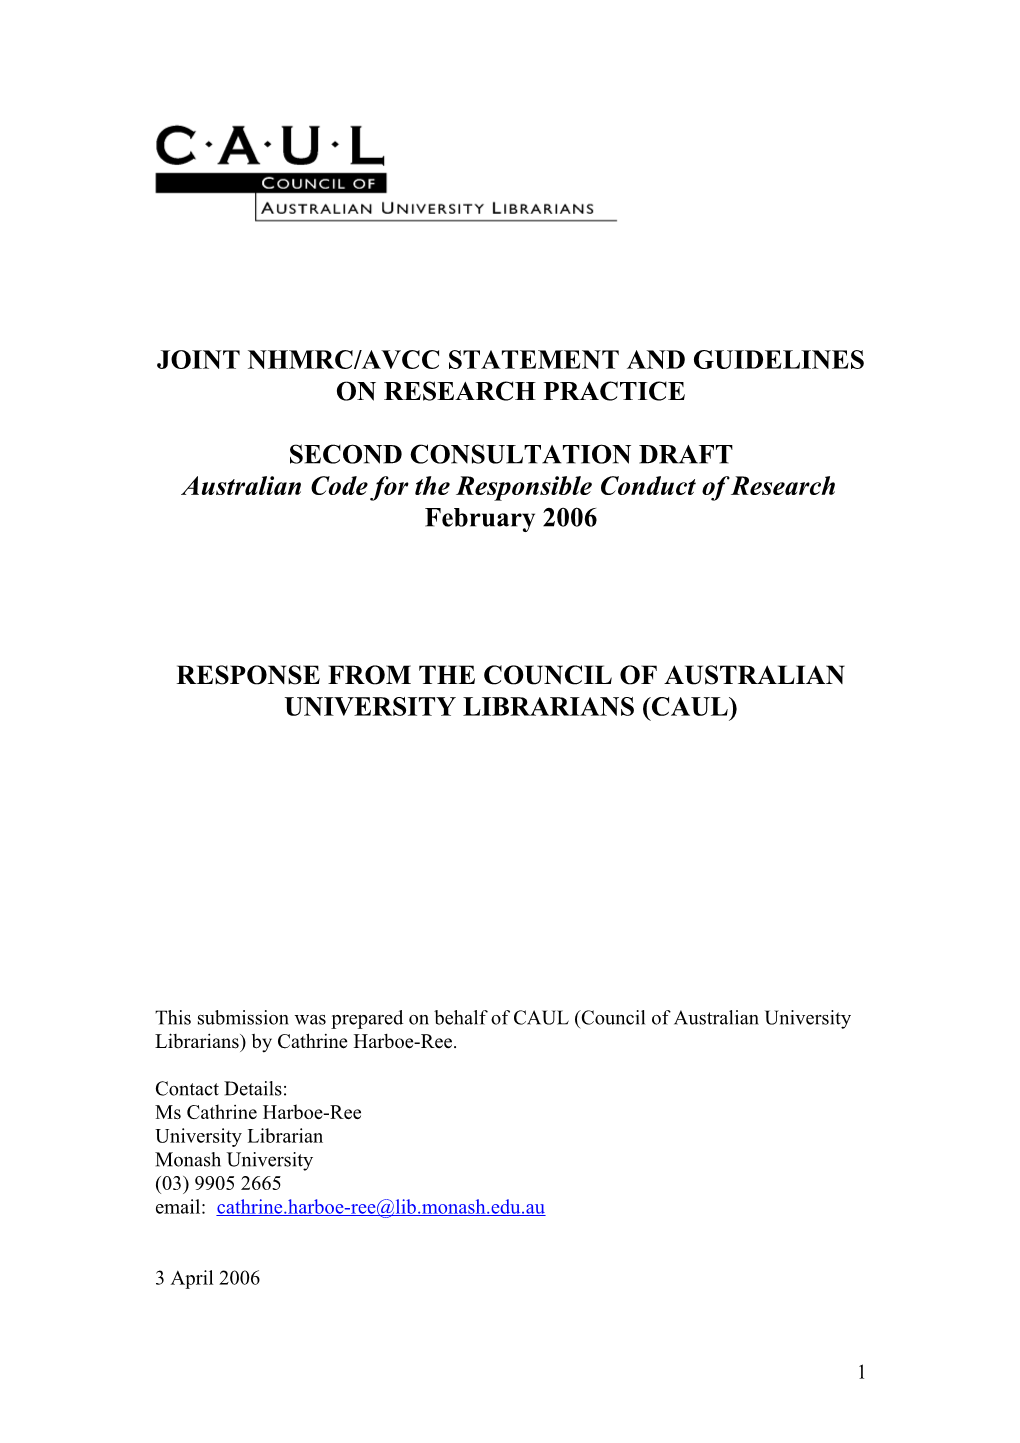 Joint Nhmrc/Avcc Statement and Guidelines on Research Practice